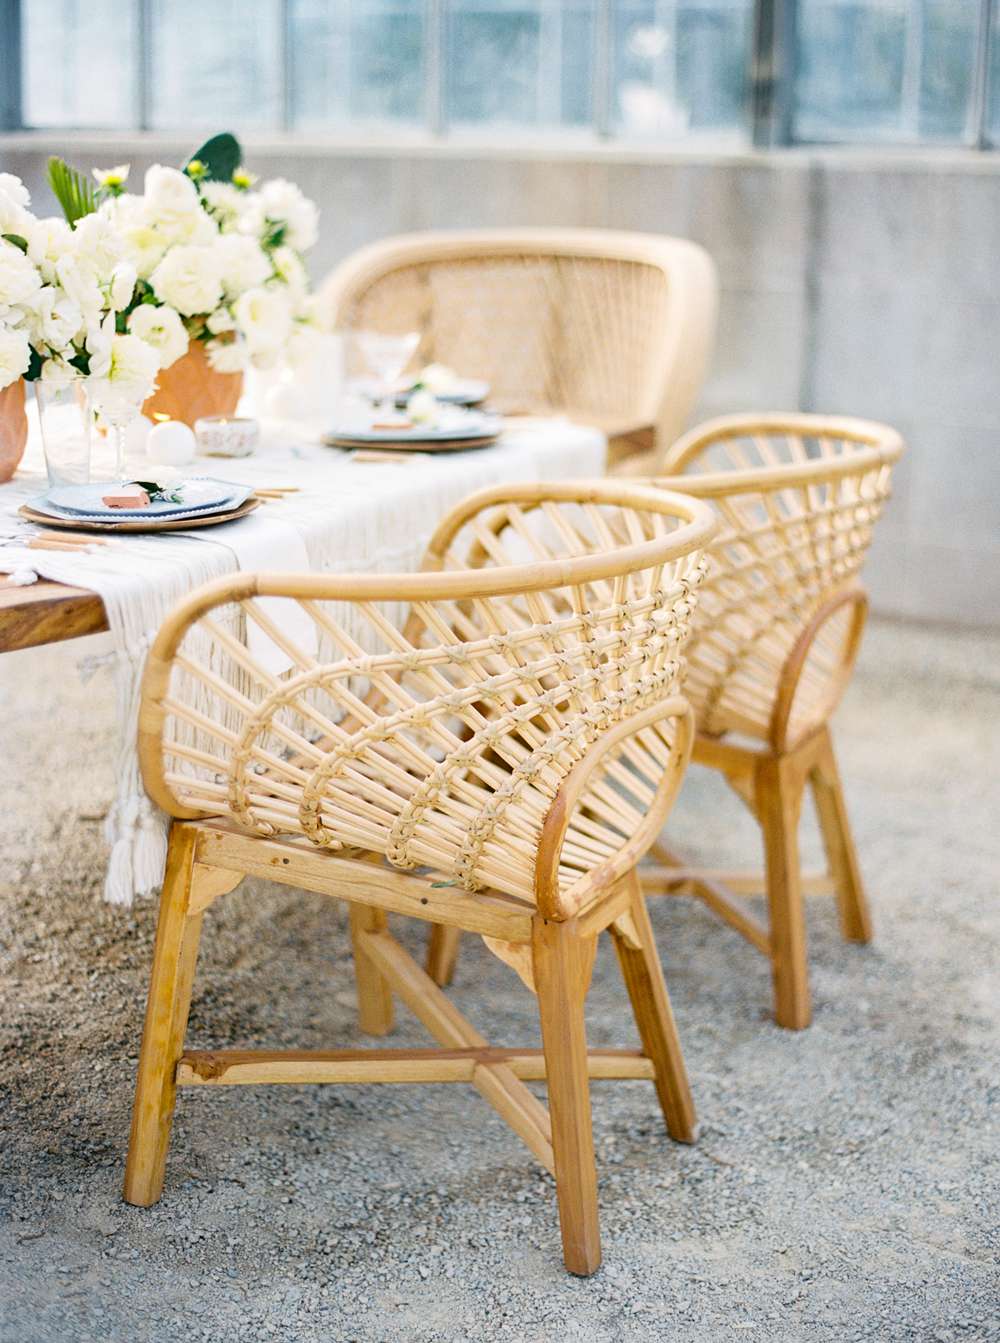 woven rattan wedding decor chairs around table decorated with white roses